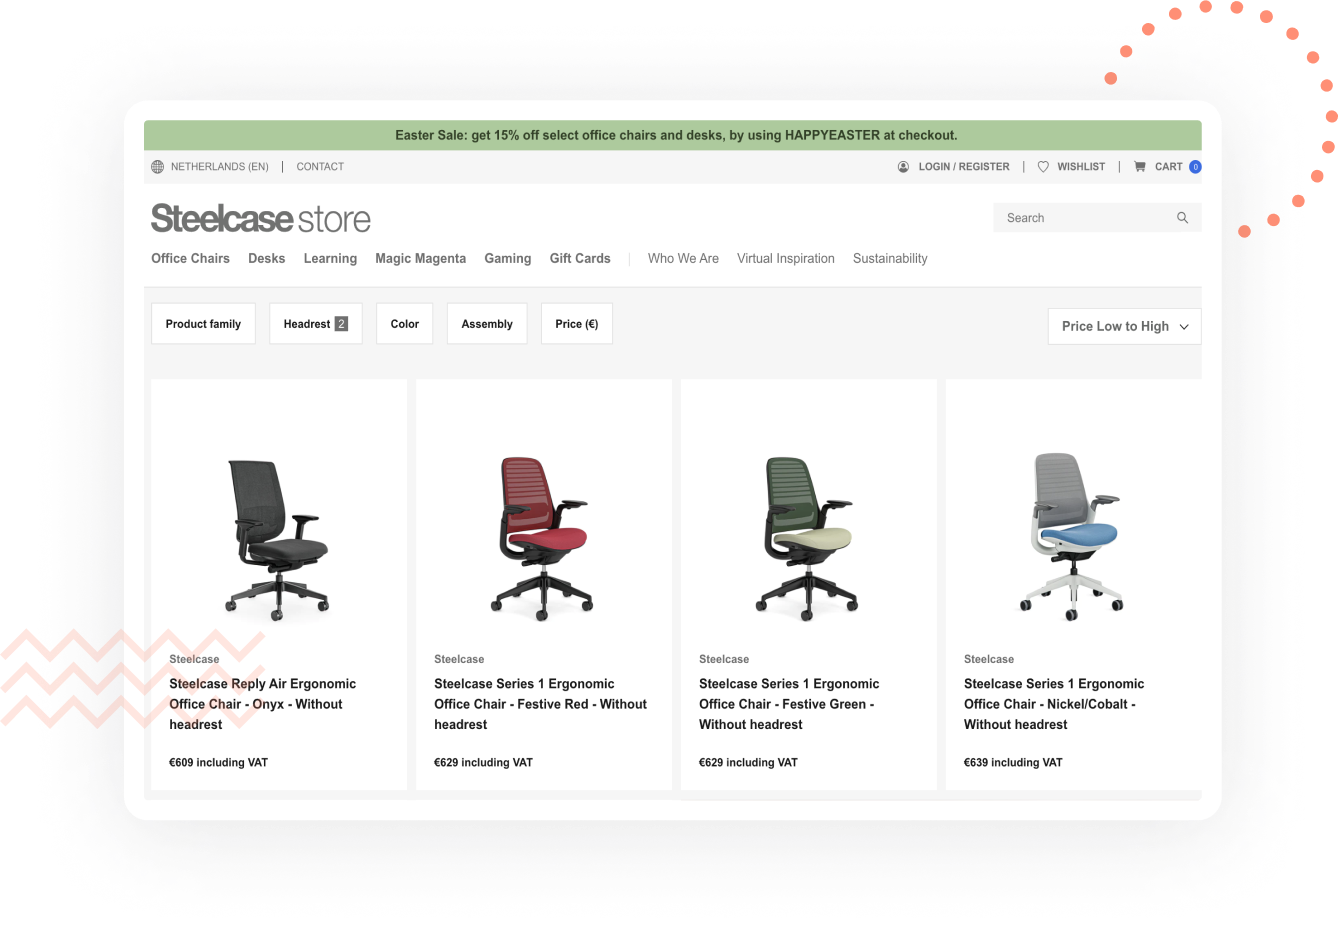 steelcase testimonial boost ai search and discovery